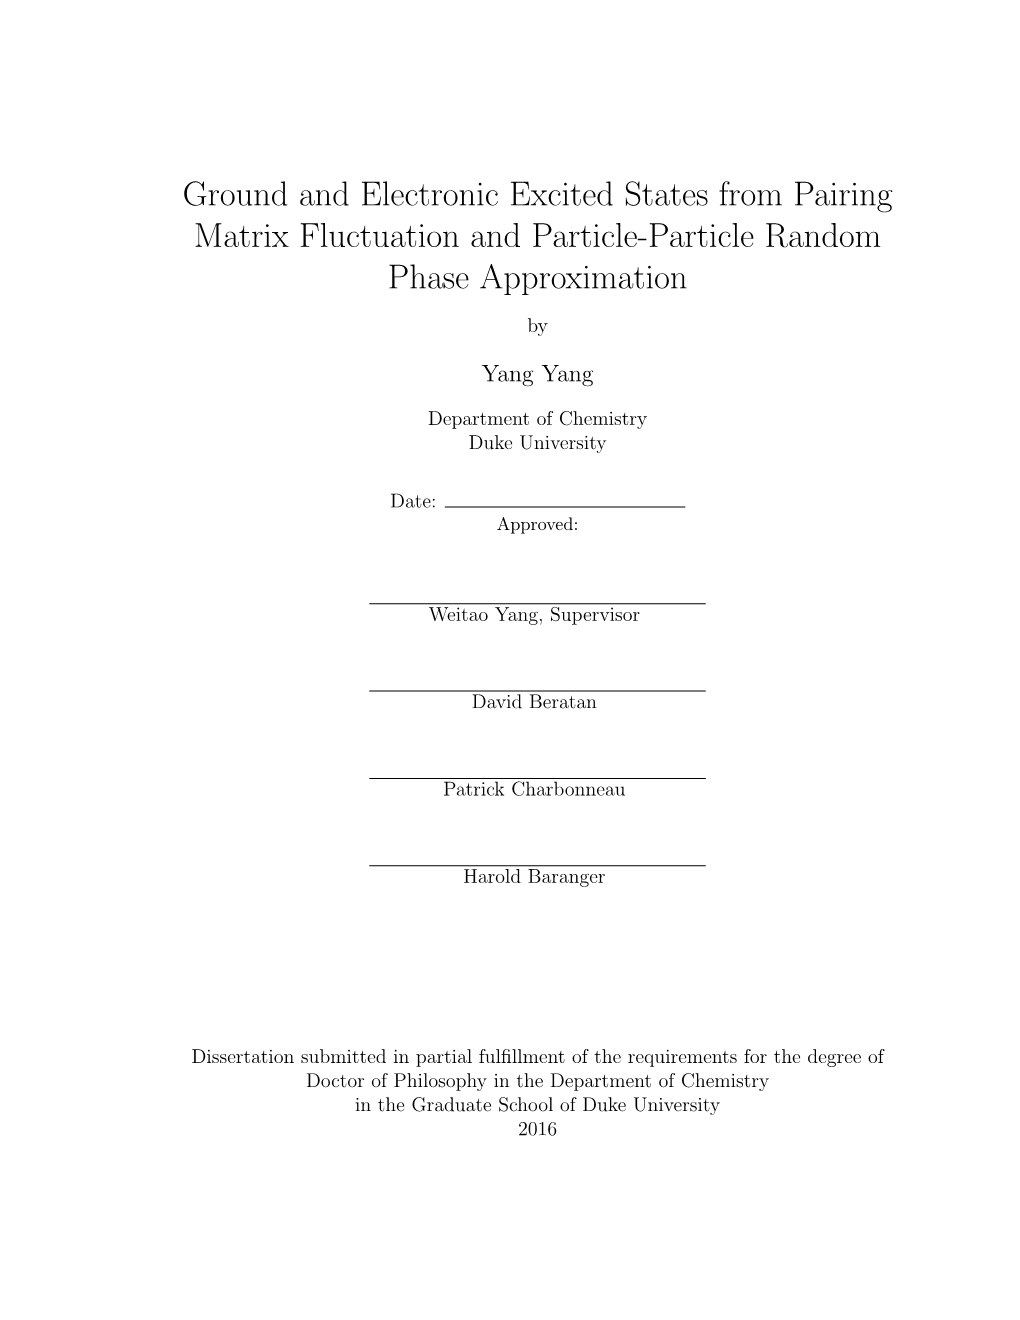 Ground and Electronic Excited States from Pairing Matrix Fluctuation and Particle-Particle Random Phase Approximation